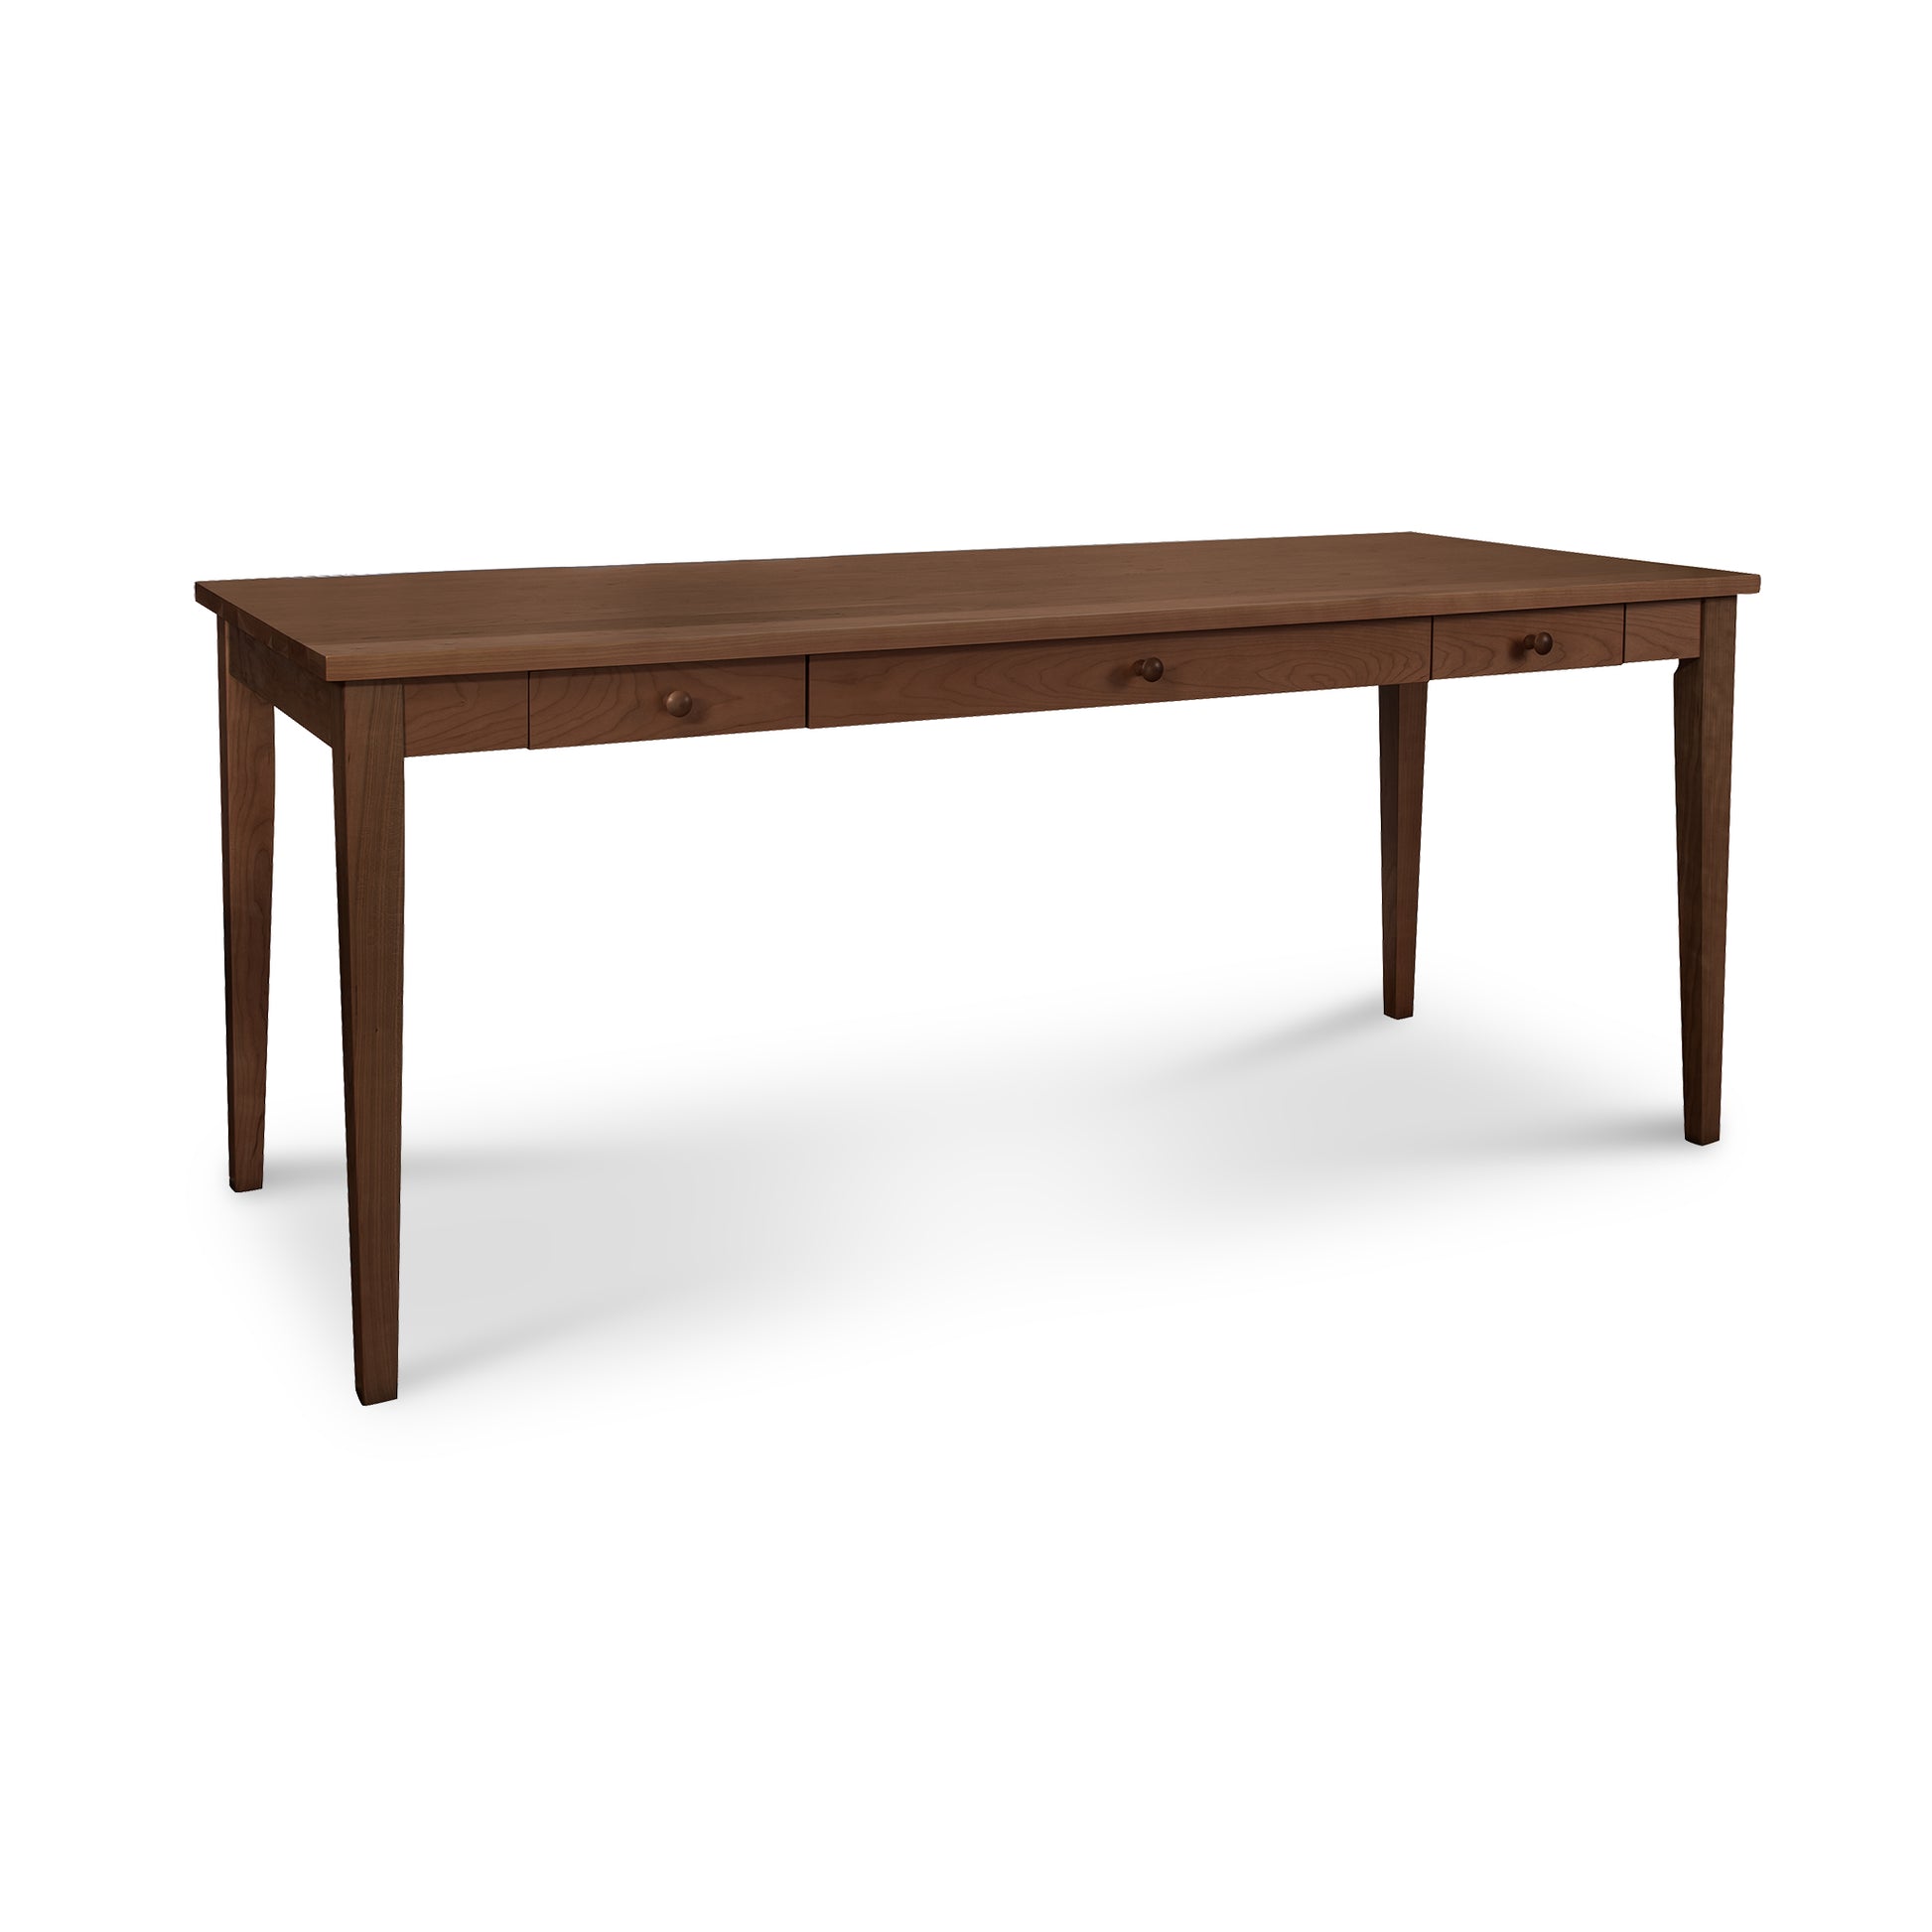 An eco-friendly Classic Shaker Writing Desk made of solid wood, featuring two drawers by Lyndon Furniture.